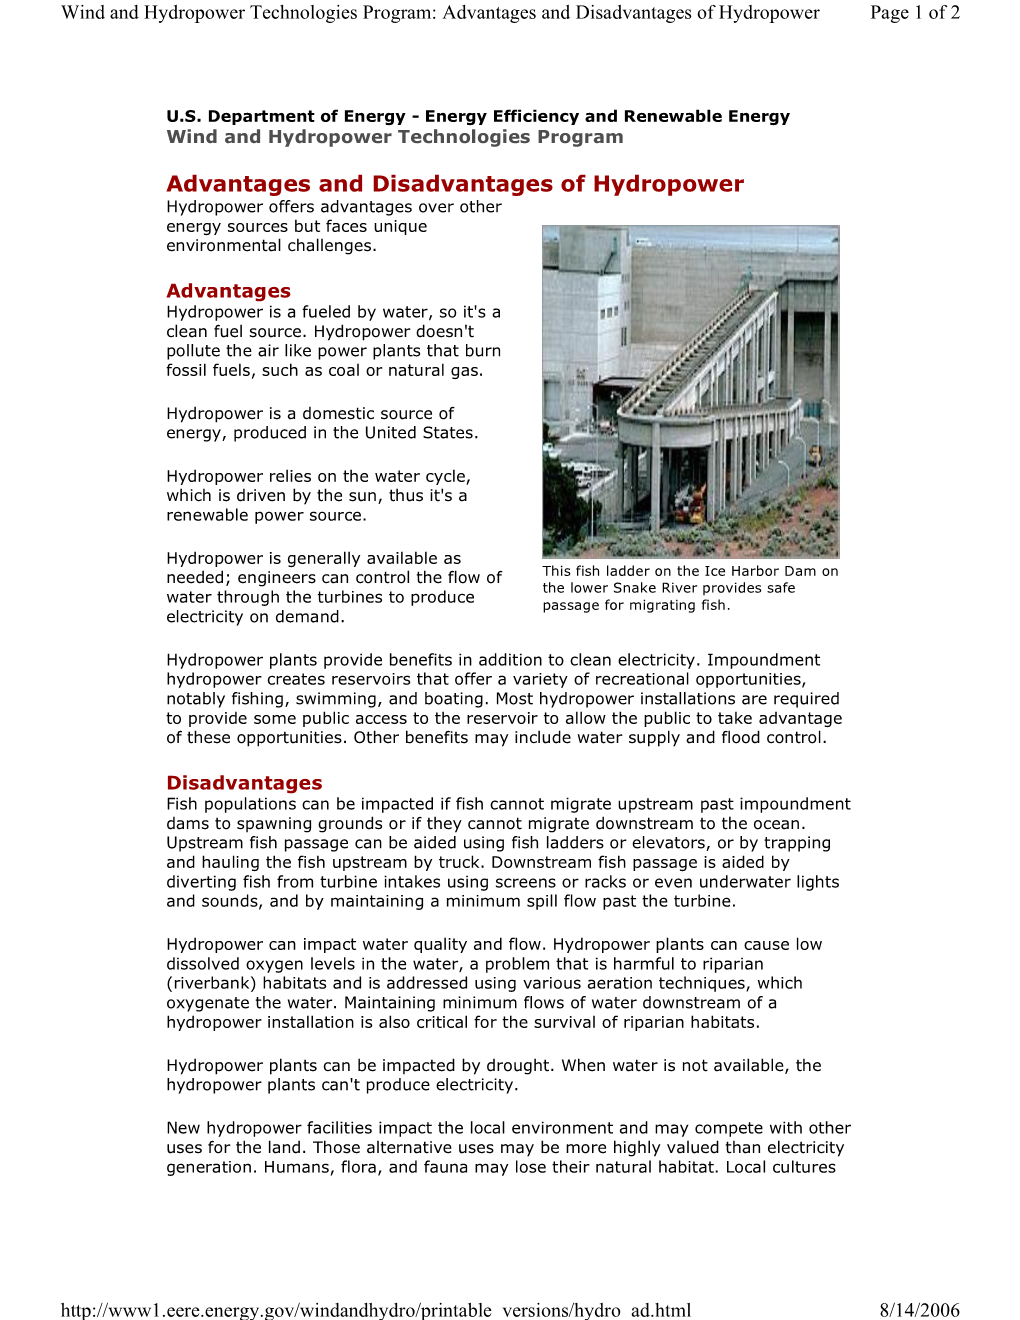 Advantages and Disadvantages of Hydropower Page 1 of 2